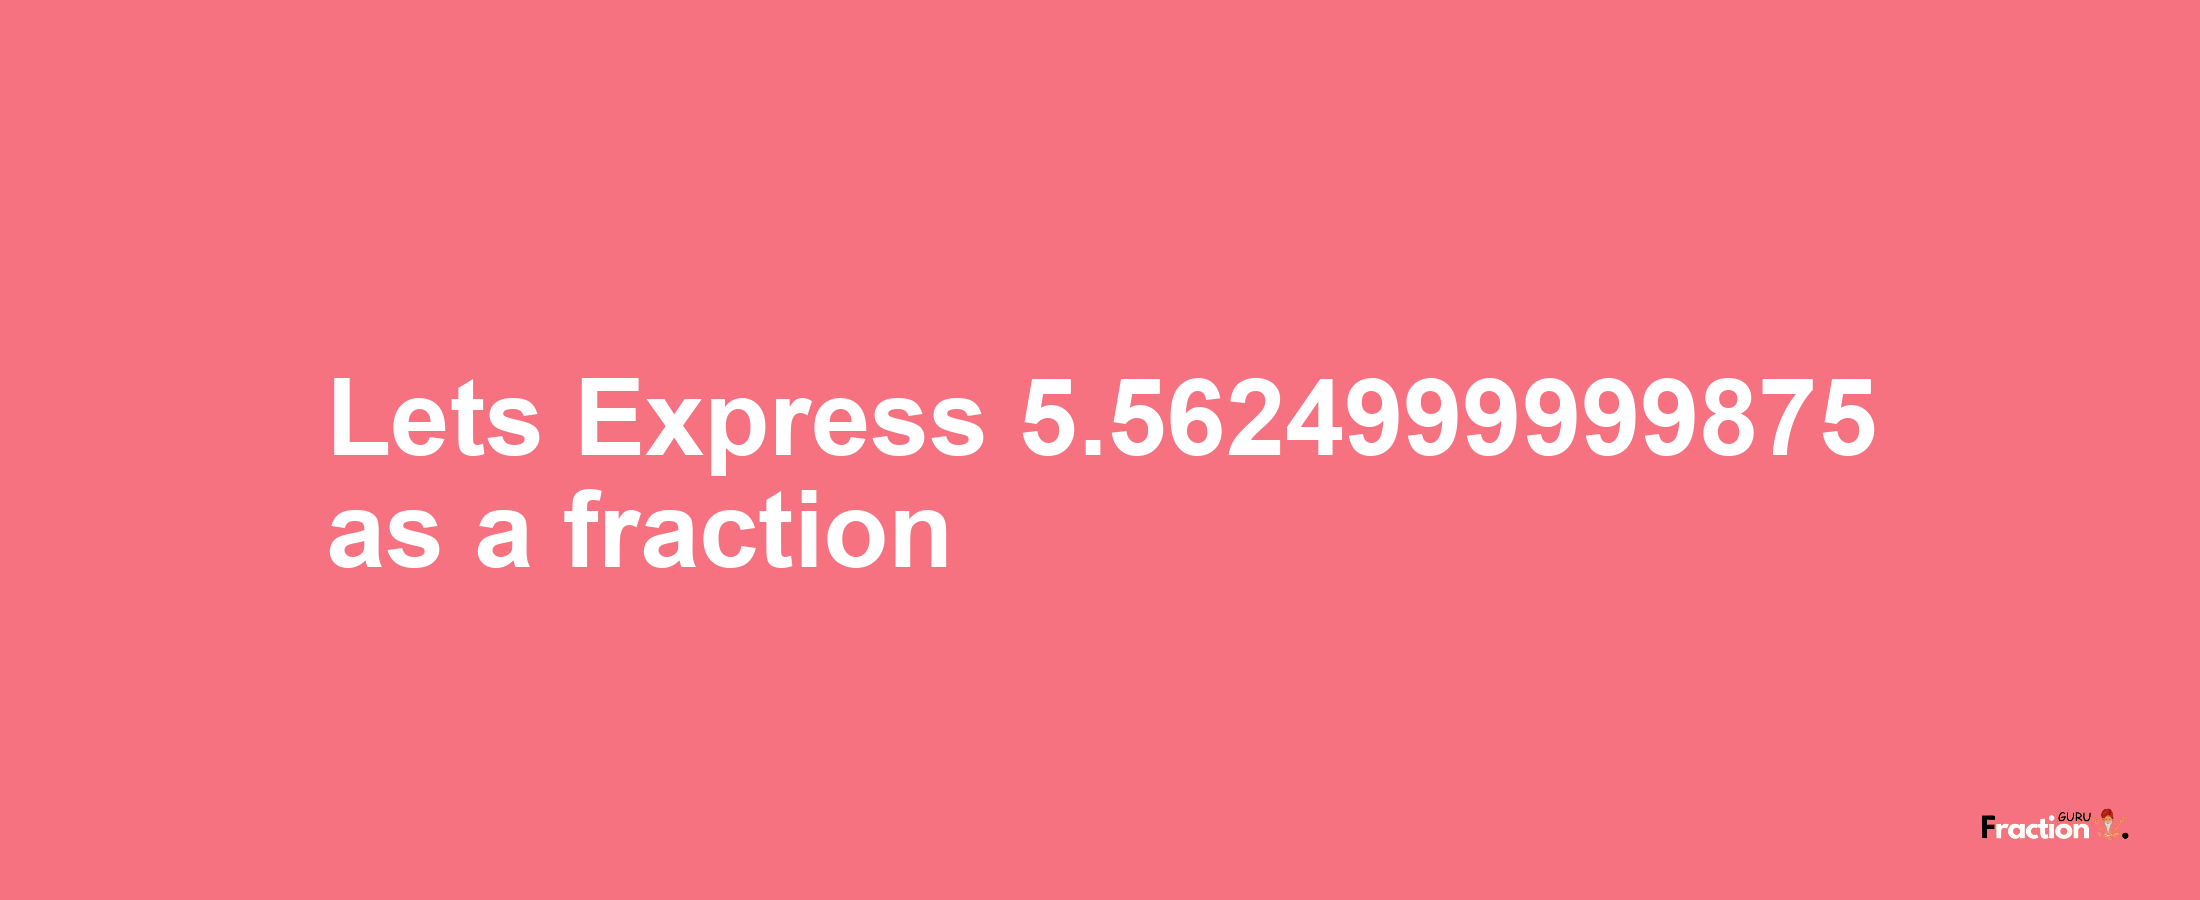 Lets Express 5.5624999999875 as afraction